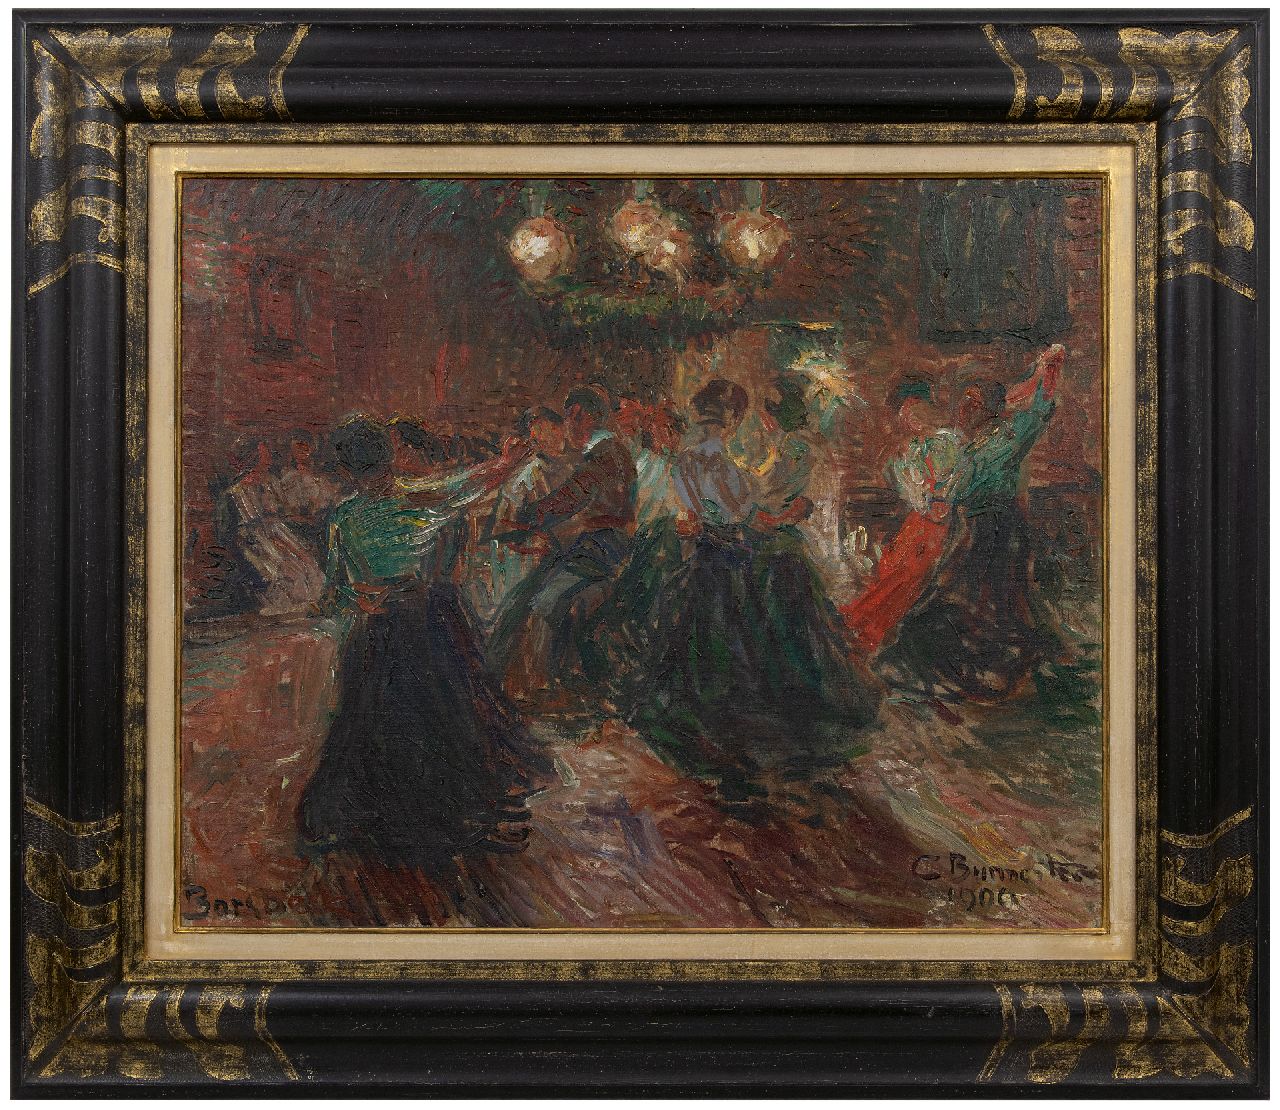 Burmester G.  | Georg Burmester | Paintings offered for sale | Party night, oil on canvas 61.5 x 75.6 cm, signed l.r. and dated 1909